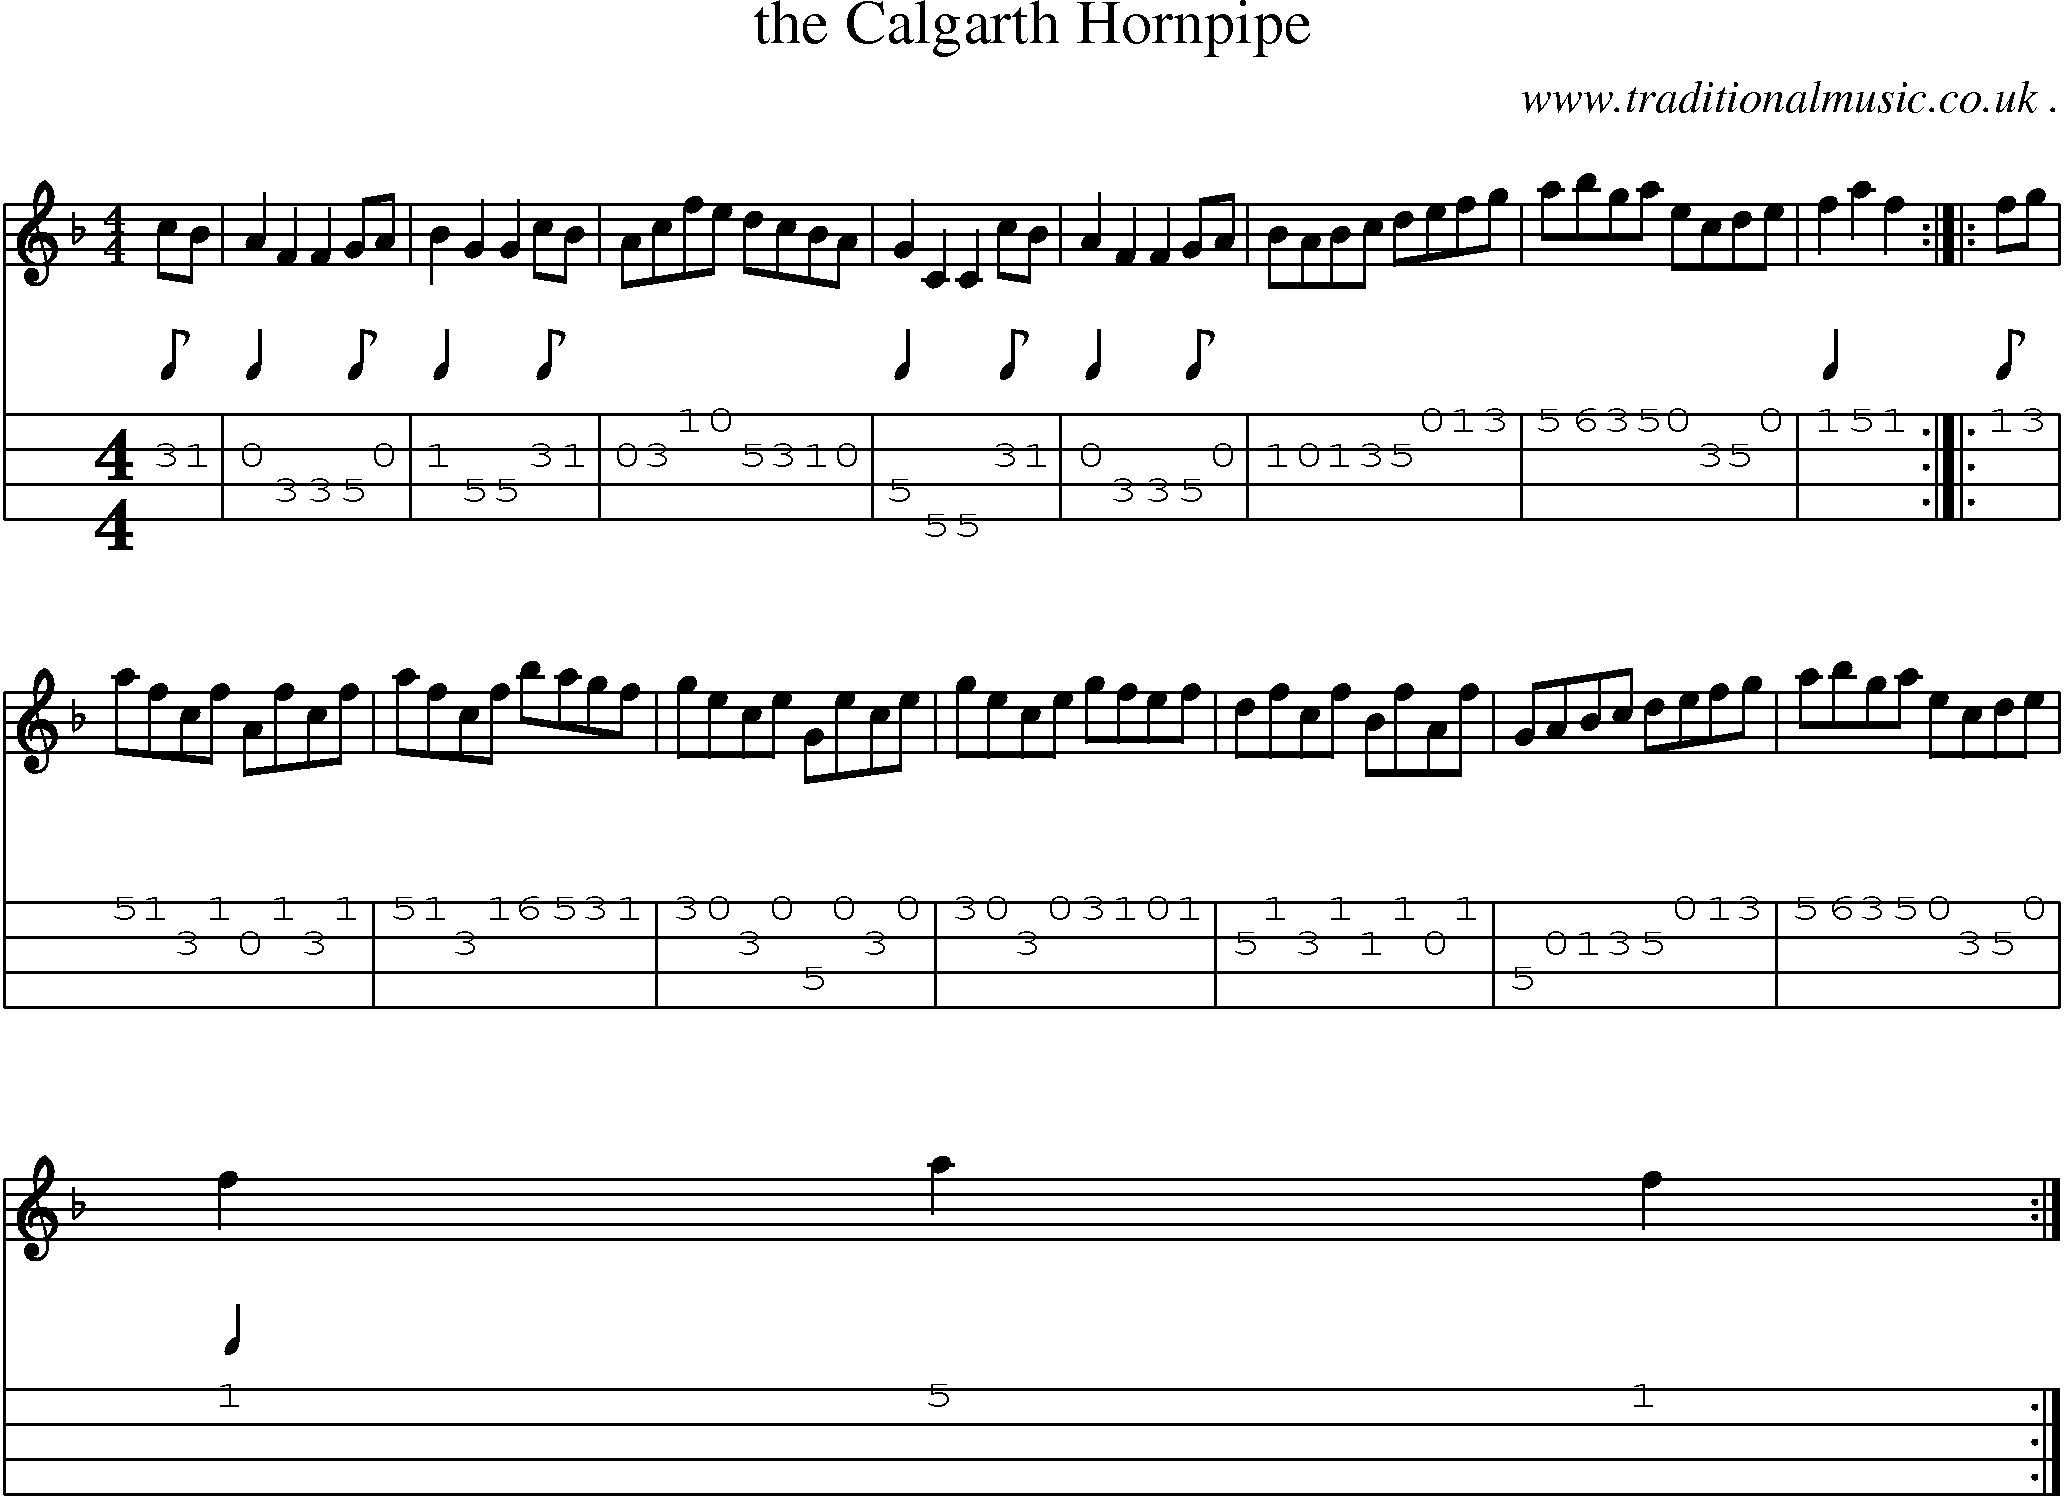 Sheet-Music and Mandolin Tabs for The Calgarth Hornpipe